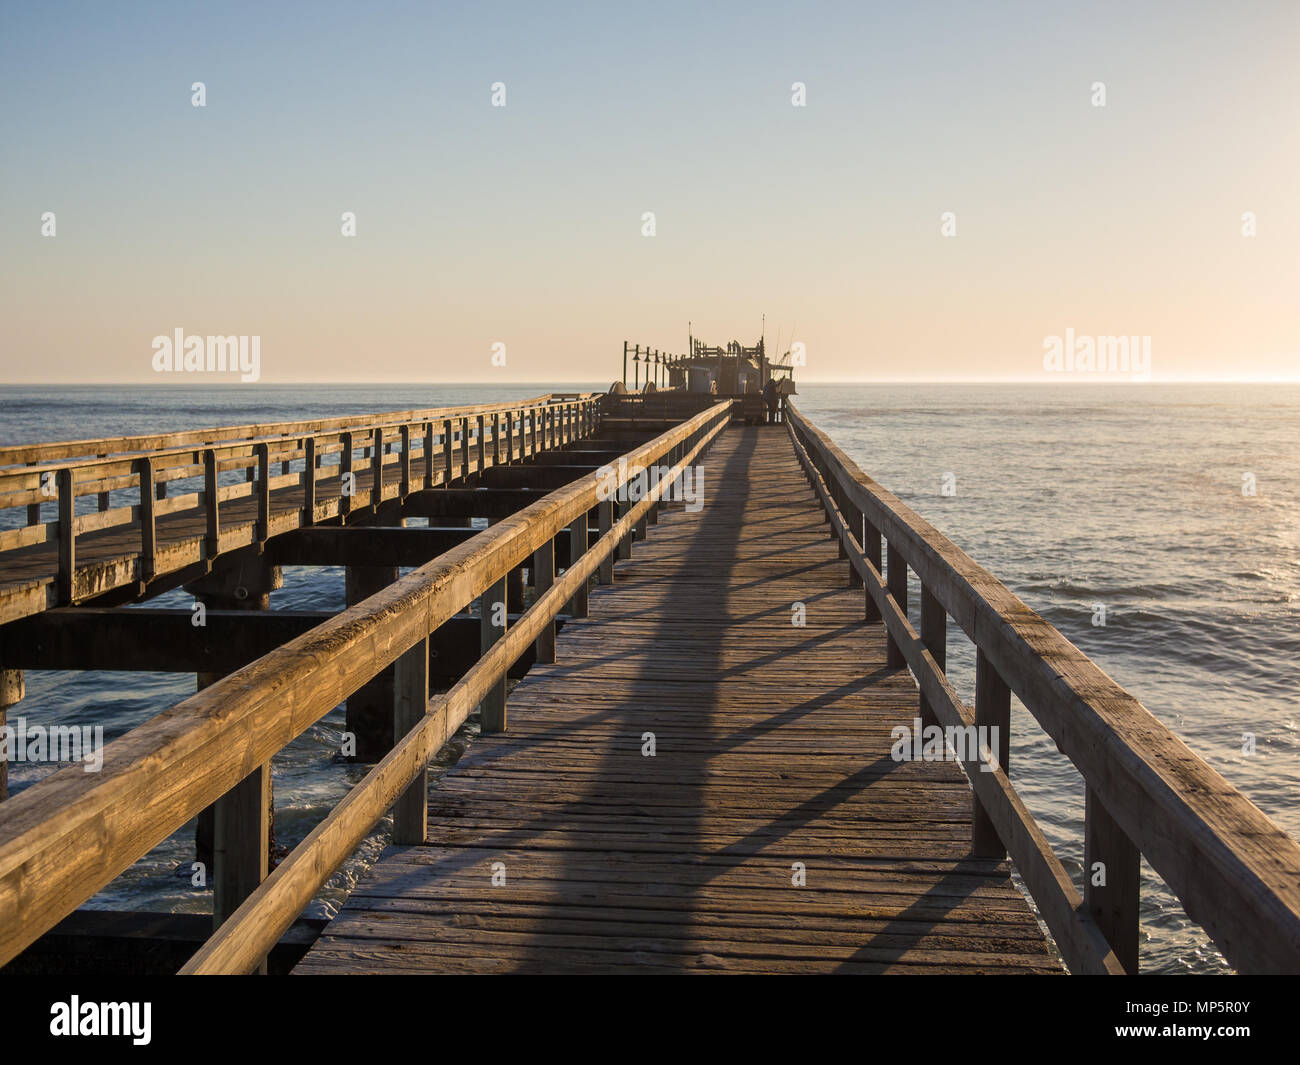 Wooden pier leading out into ocean with calm sea during soft sunset, Swakopmund, Namibia Stock Photo